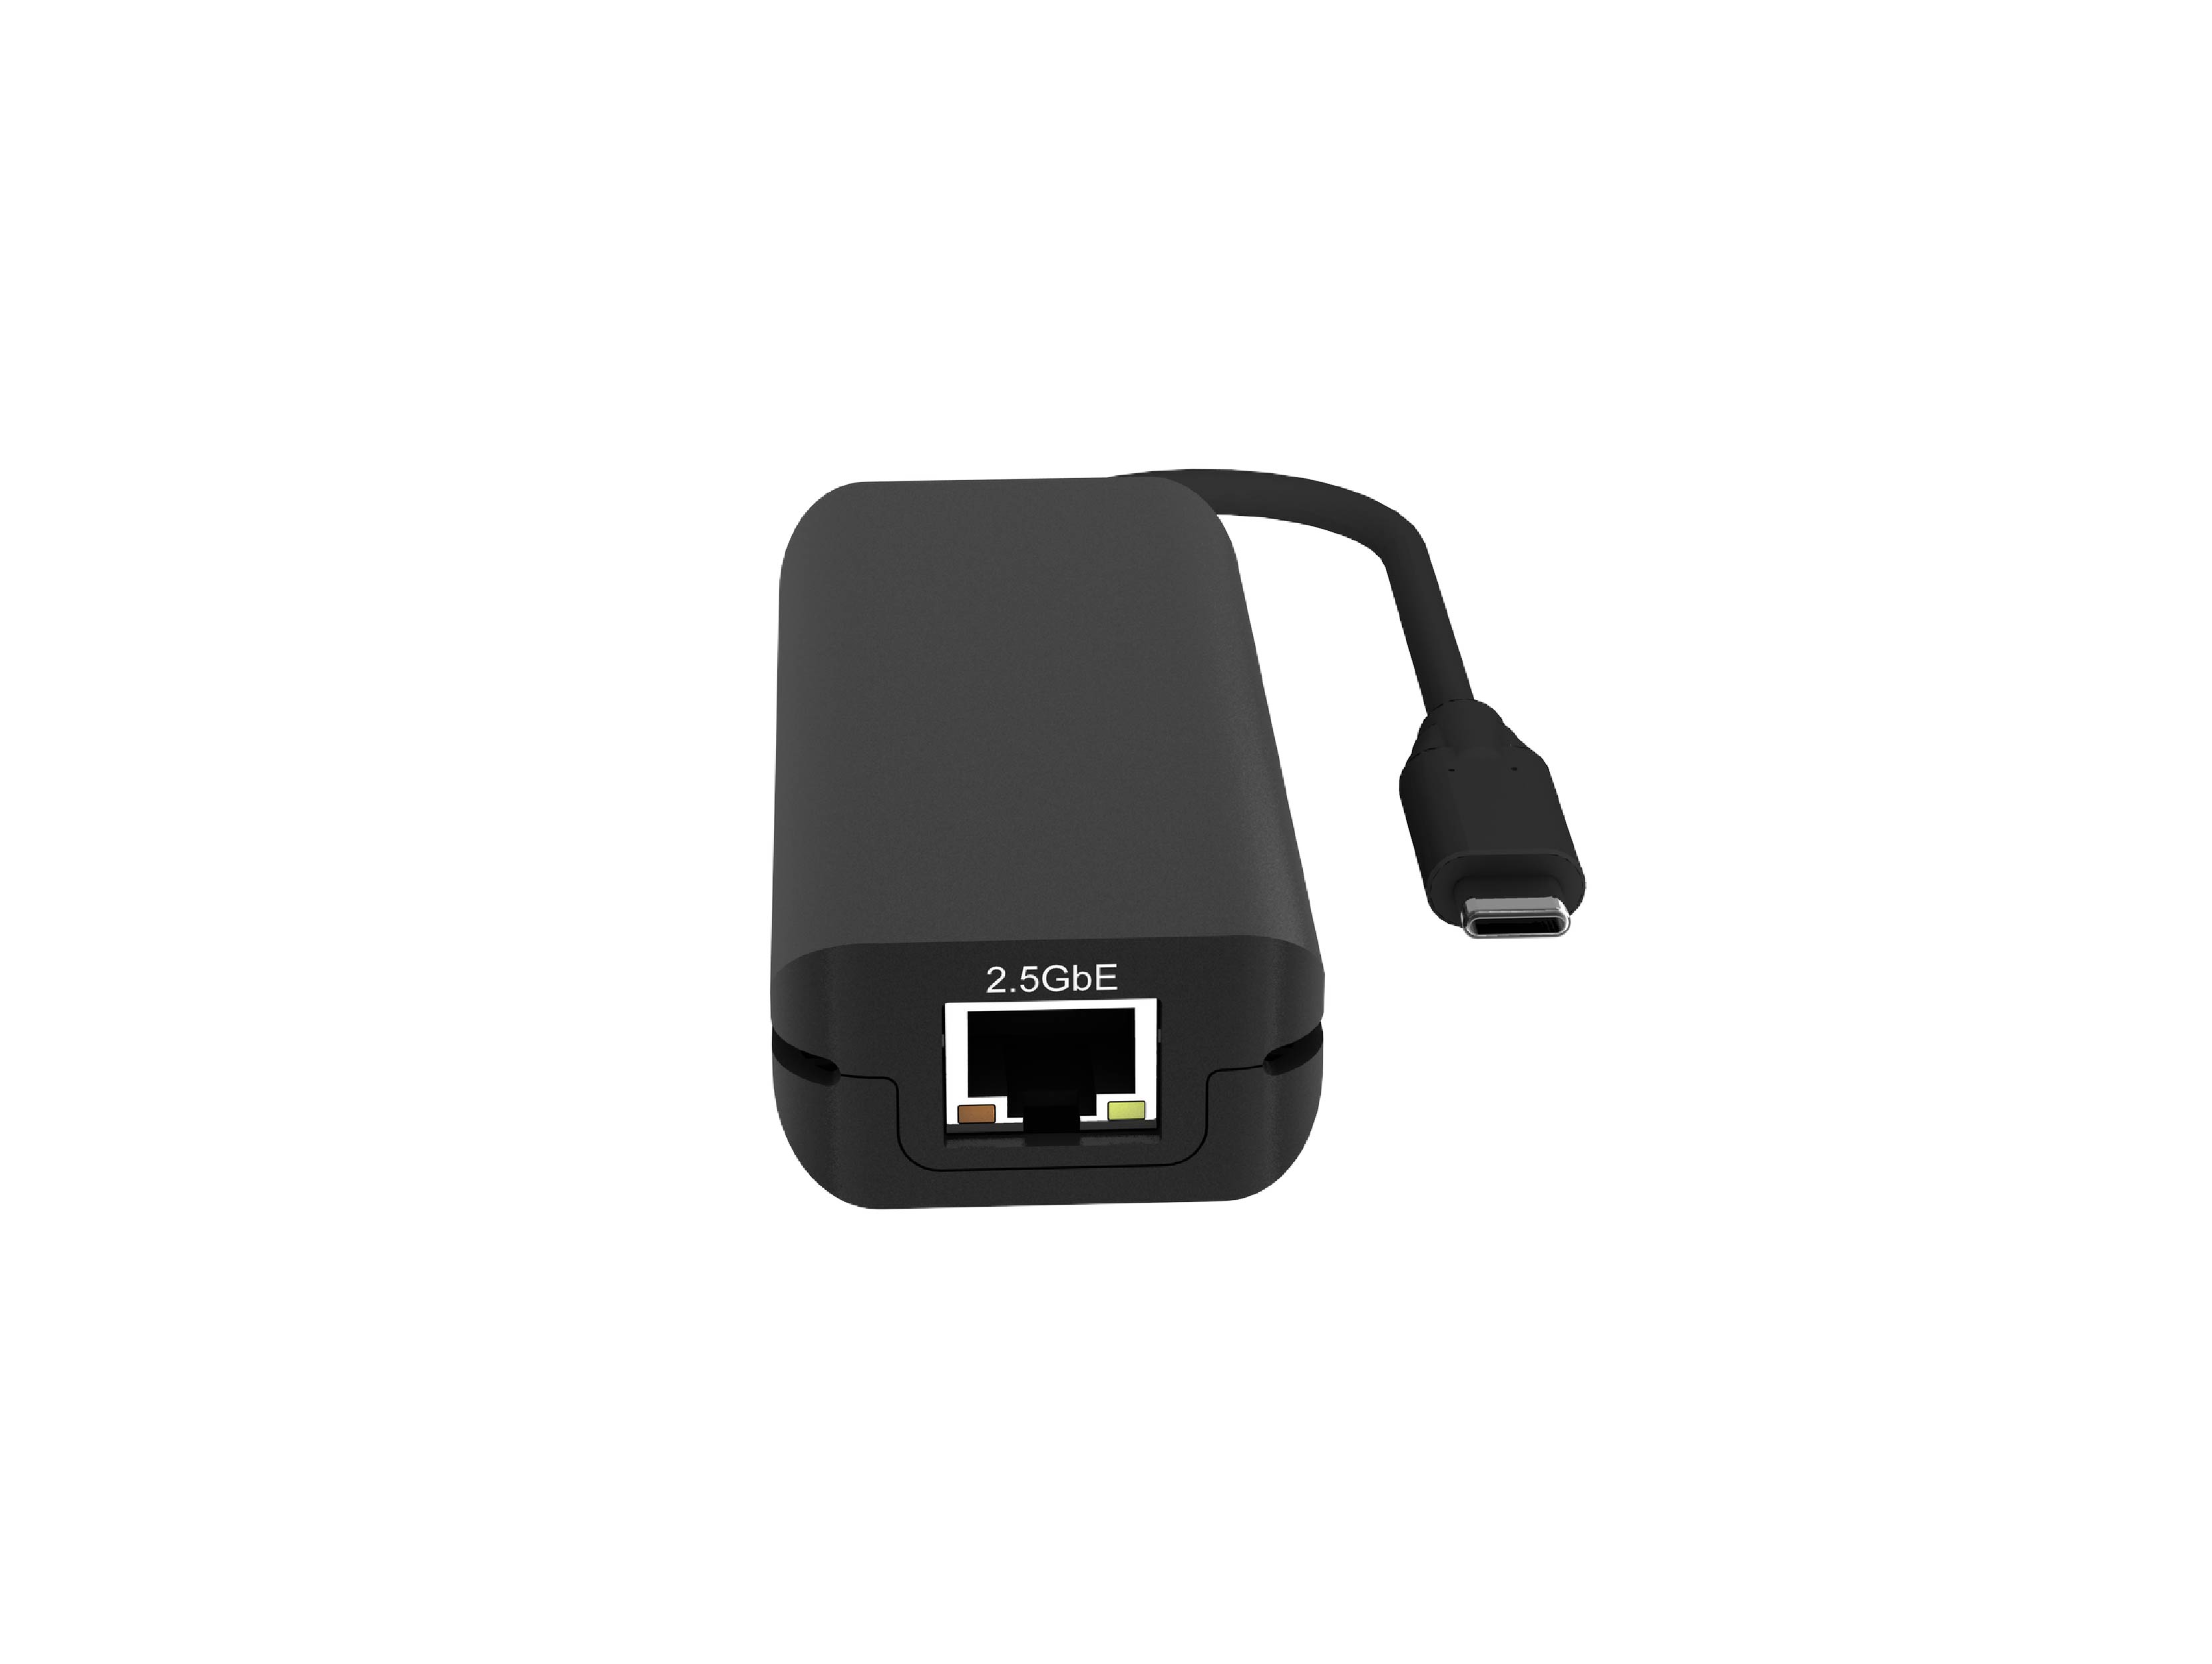 2.5GbE Network Adapter (SI-1254LUS31C), backward compatible 1GbE and 100MbE, USB3.2-C 10Gbps to host, portable design, embedded captive cable.